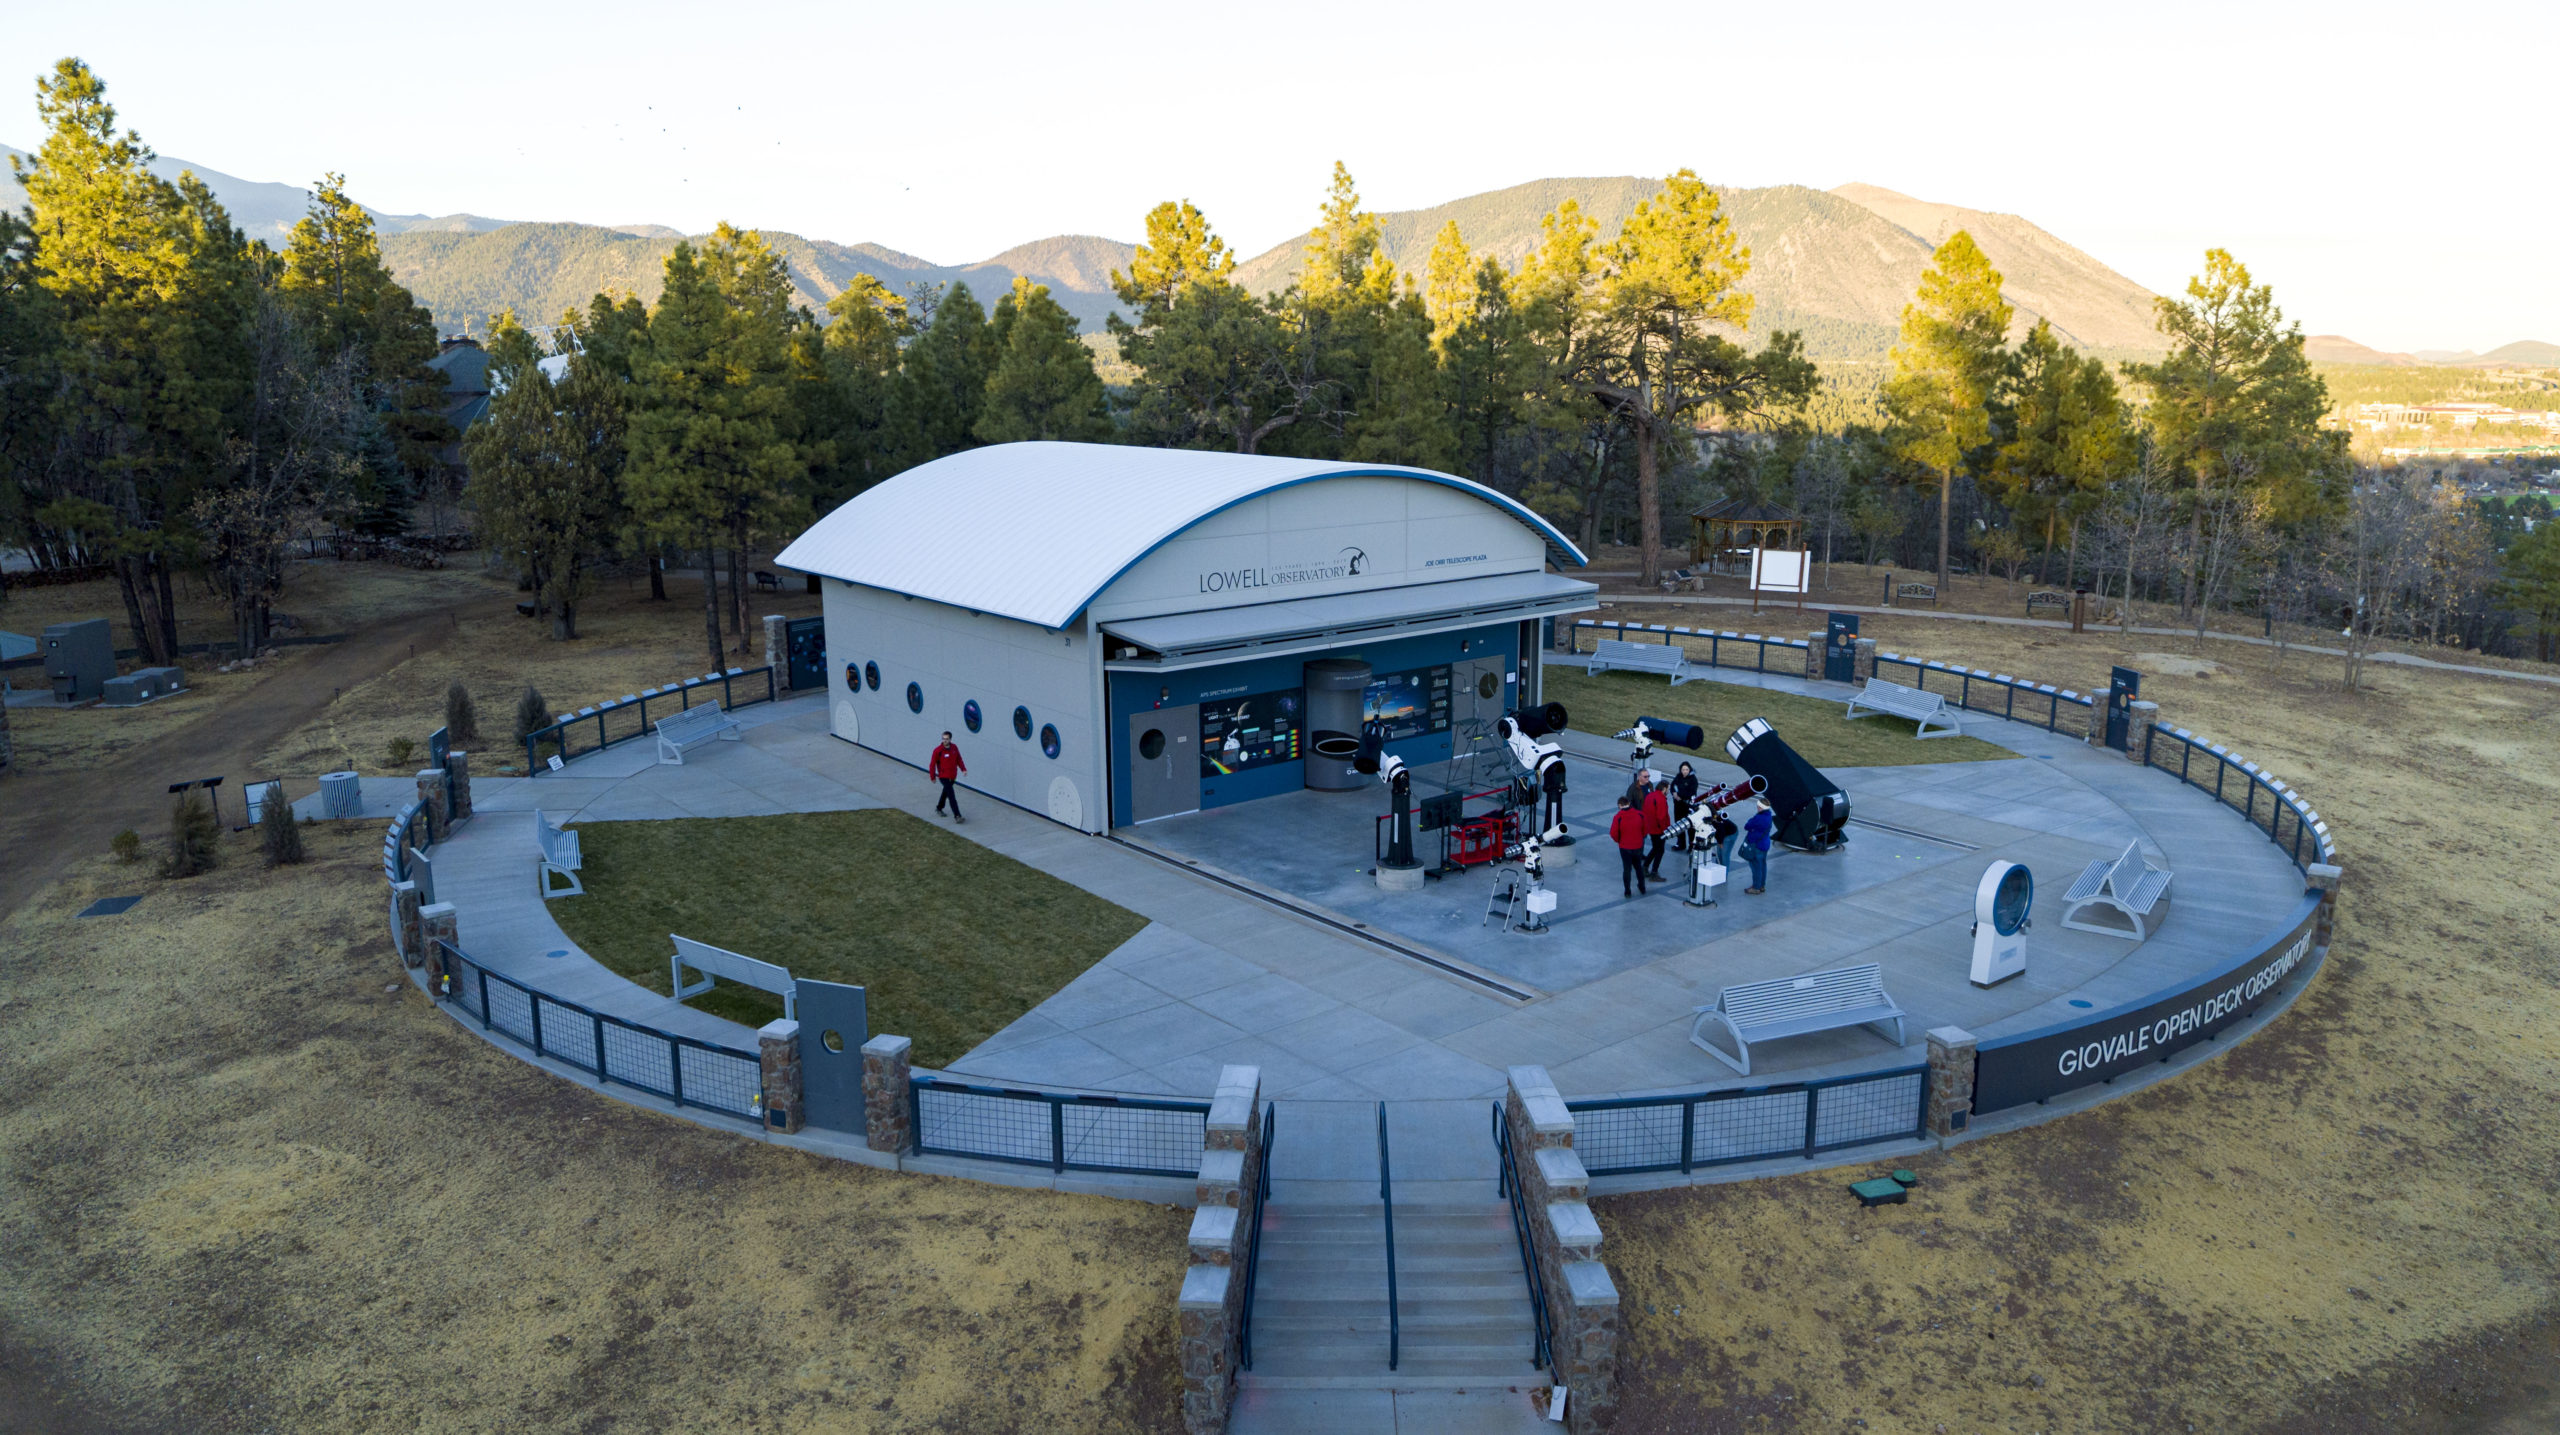 The Giovale Open Deck Observatory at Lowell Observatory